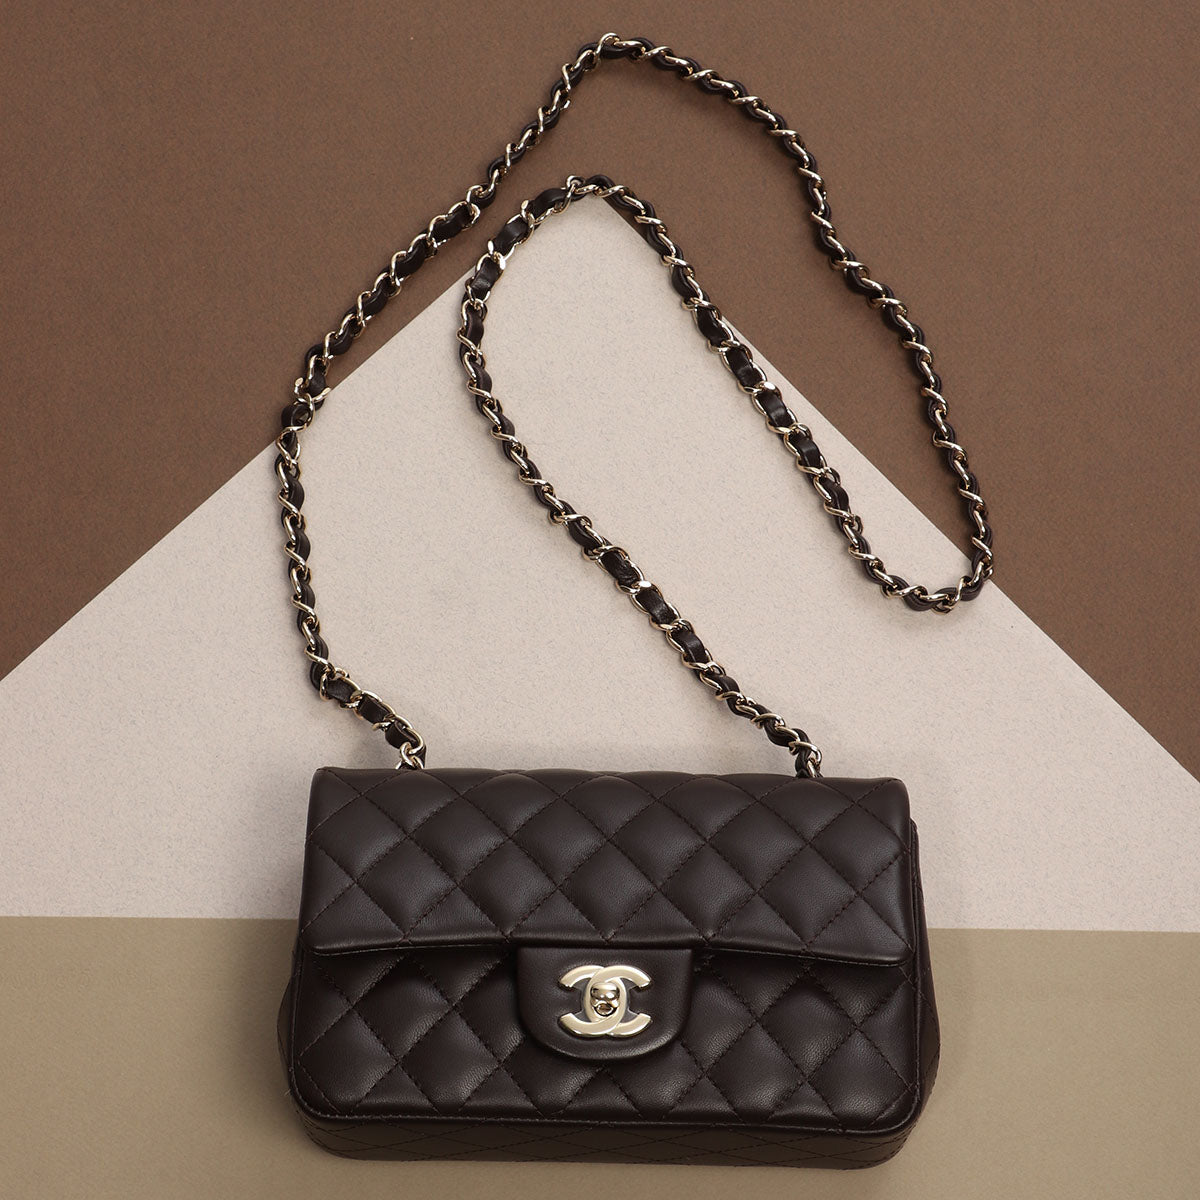 chanel flap bag brown new